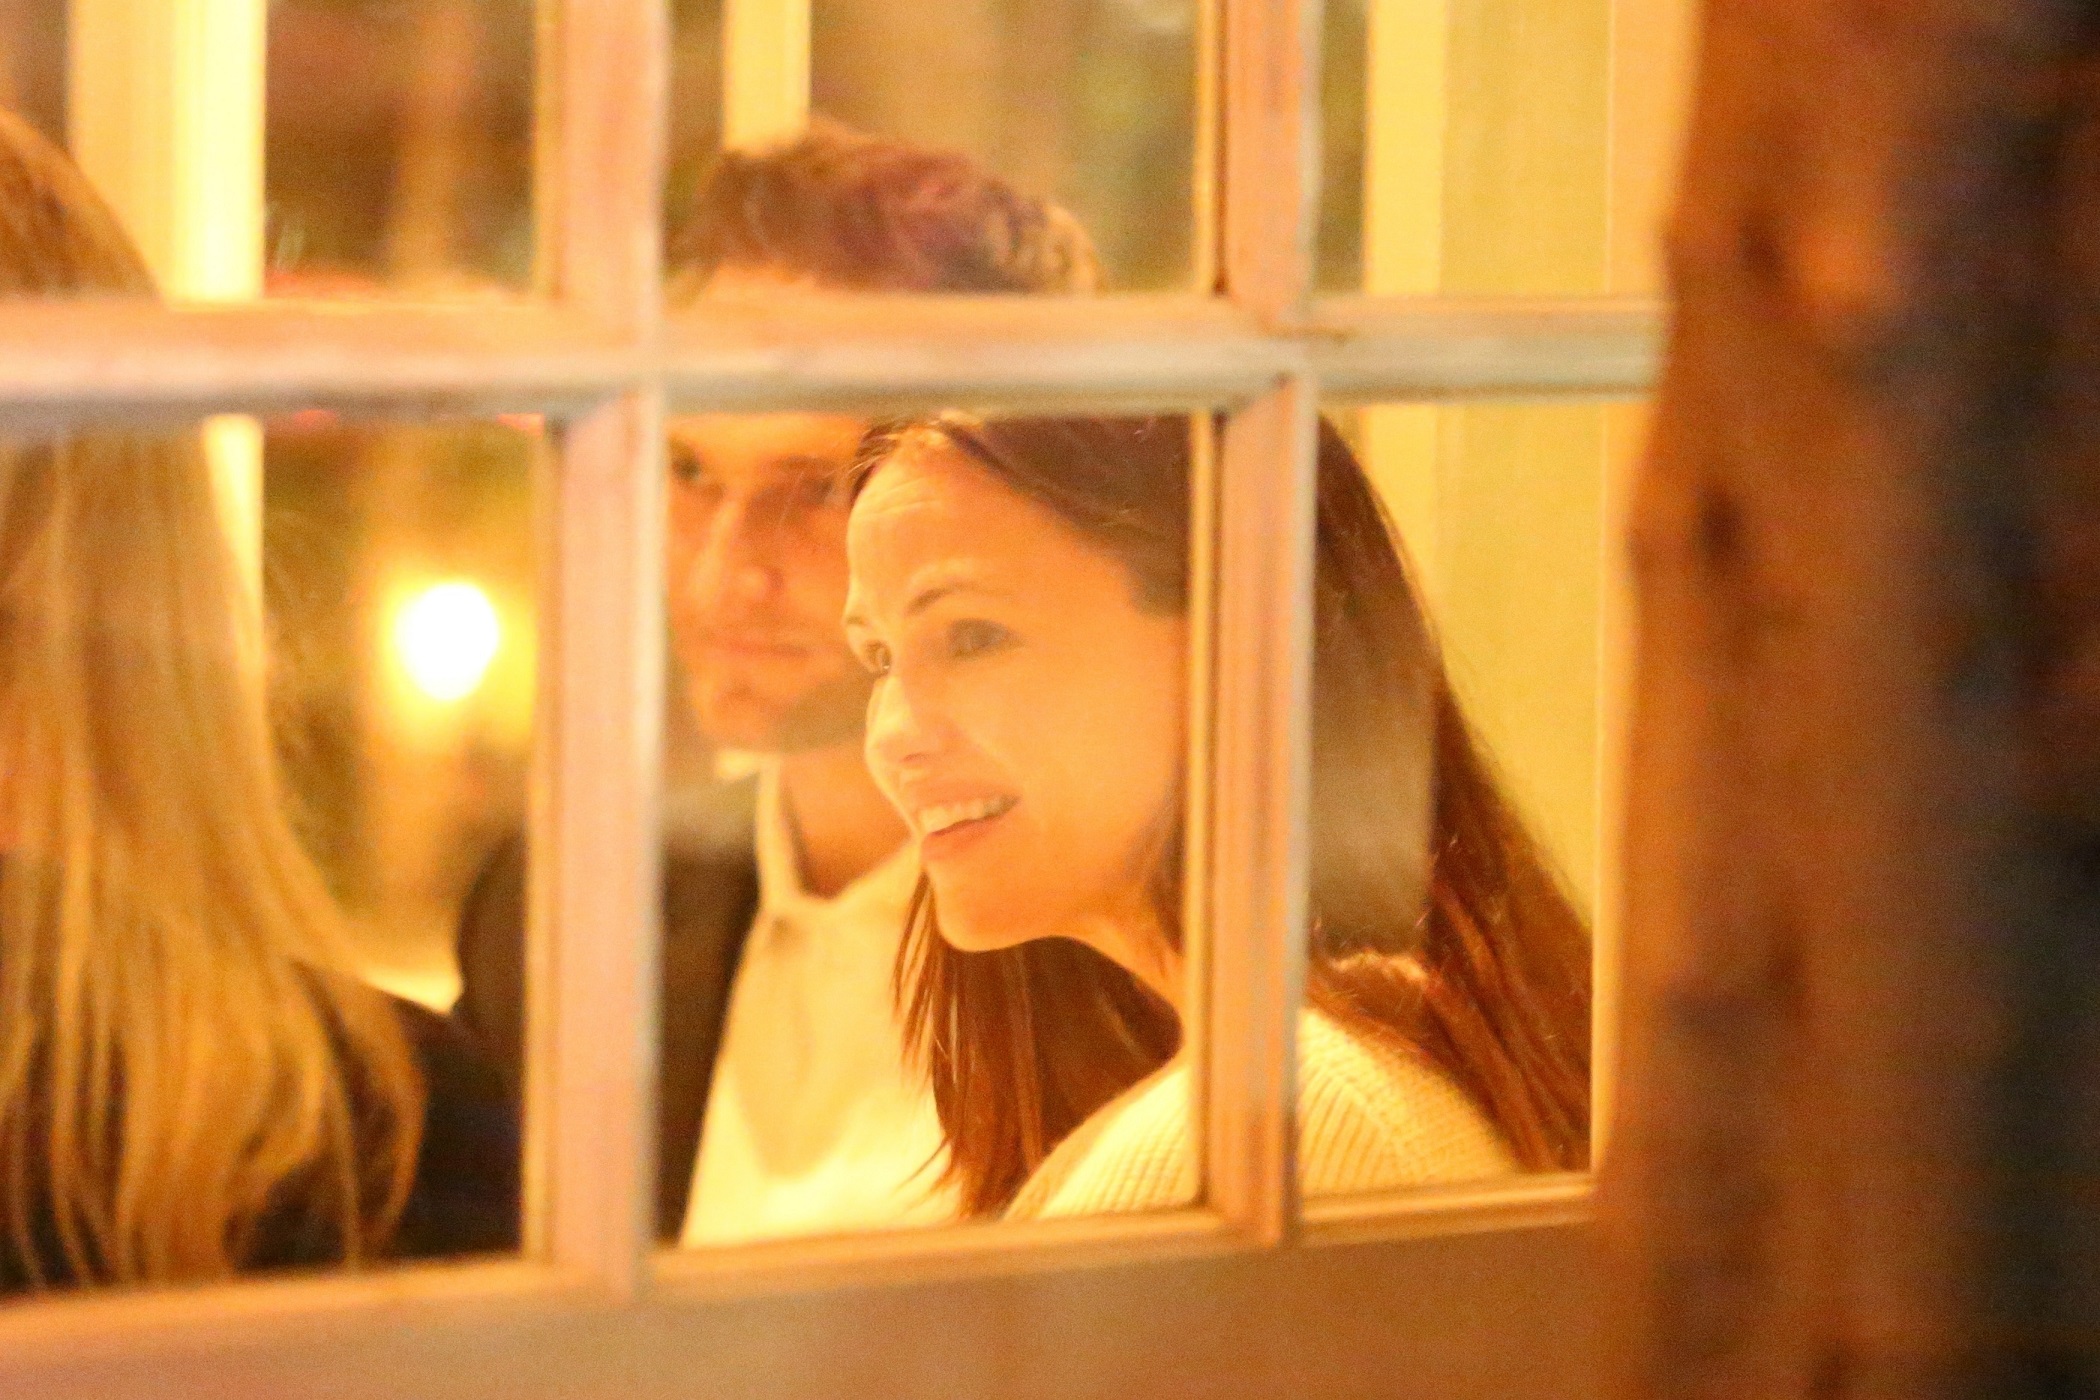 *EXCLUSIVE* Los Angeles, CA  - **WEB MUST CALL FOR PRICING** Jennifer Garner and boyfriend John Miller enjoy a romantic dinner date at Giorgio Baldi restaurant in Santa Monica. Jennifer looks very happy after having a three hour long dinner with John and two other couples. Shot on 02/27/19.

Pictured: Jennifer Garner, John Miller

BACKGRID USA 28 FEBRUARY 2019,Image: 416545072, License: Rights-managed, Restrictions: , Model Release: no, Credit line: Maciel / BACKGRID / Backgrid USA / Profimedia